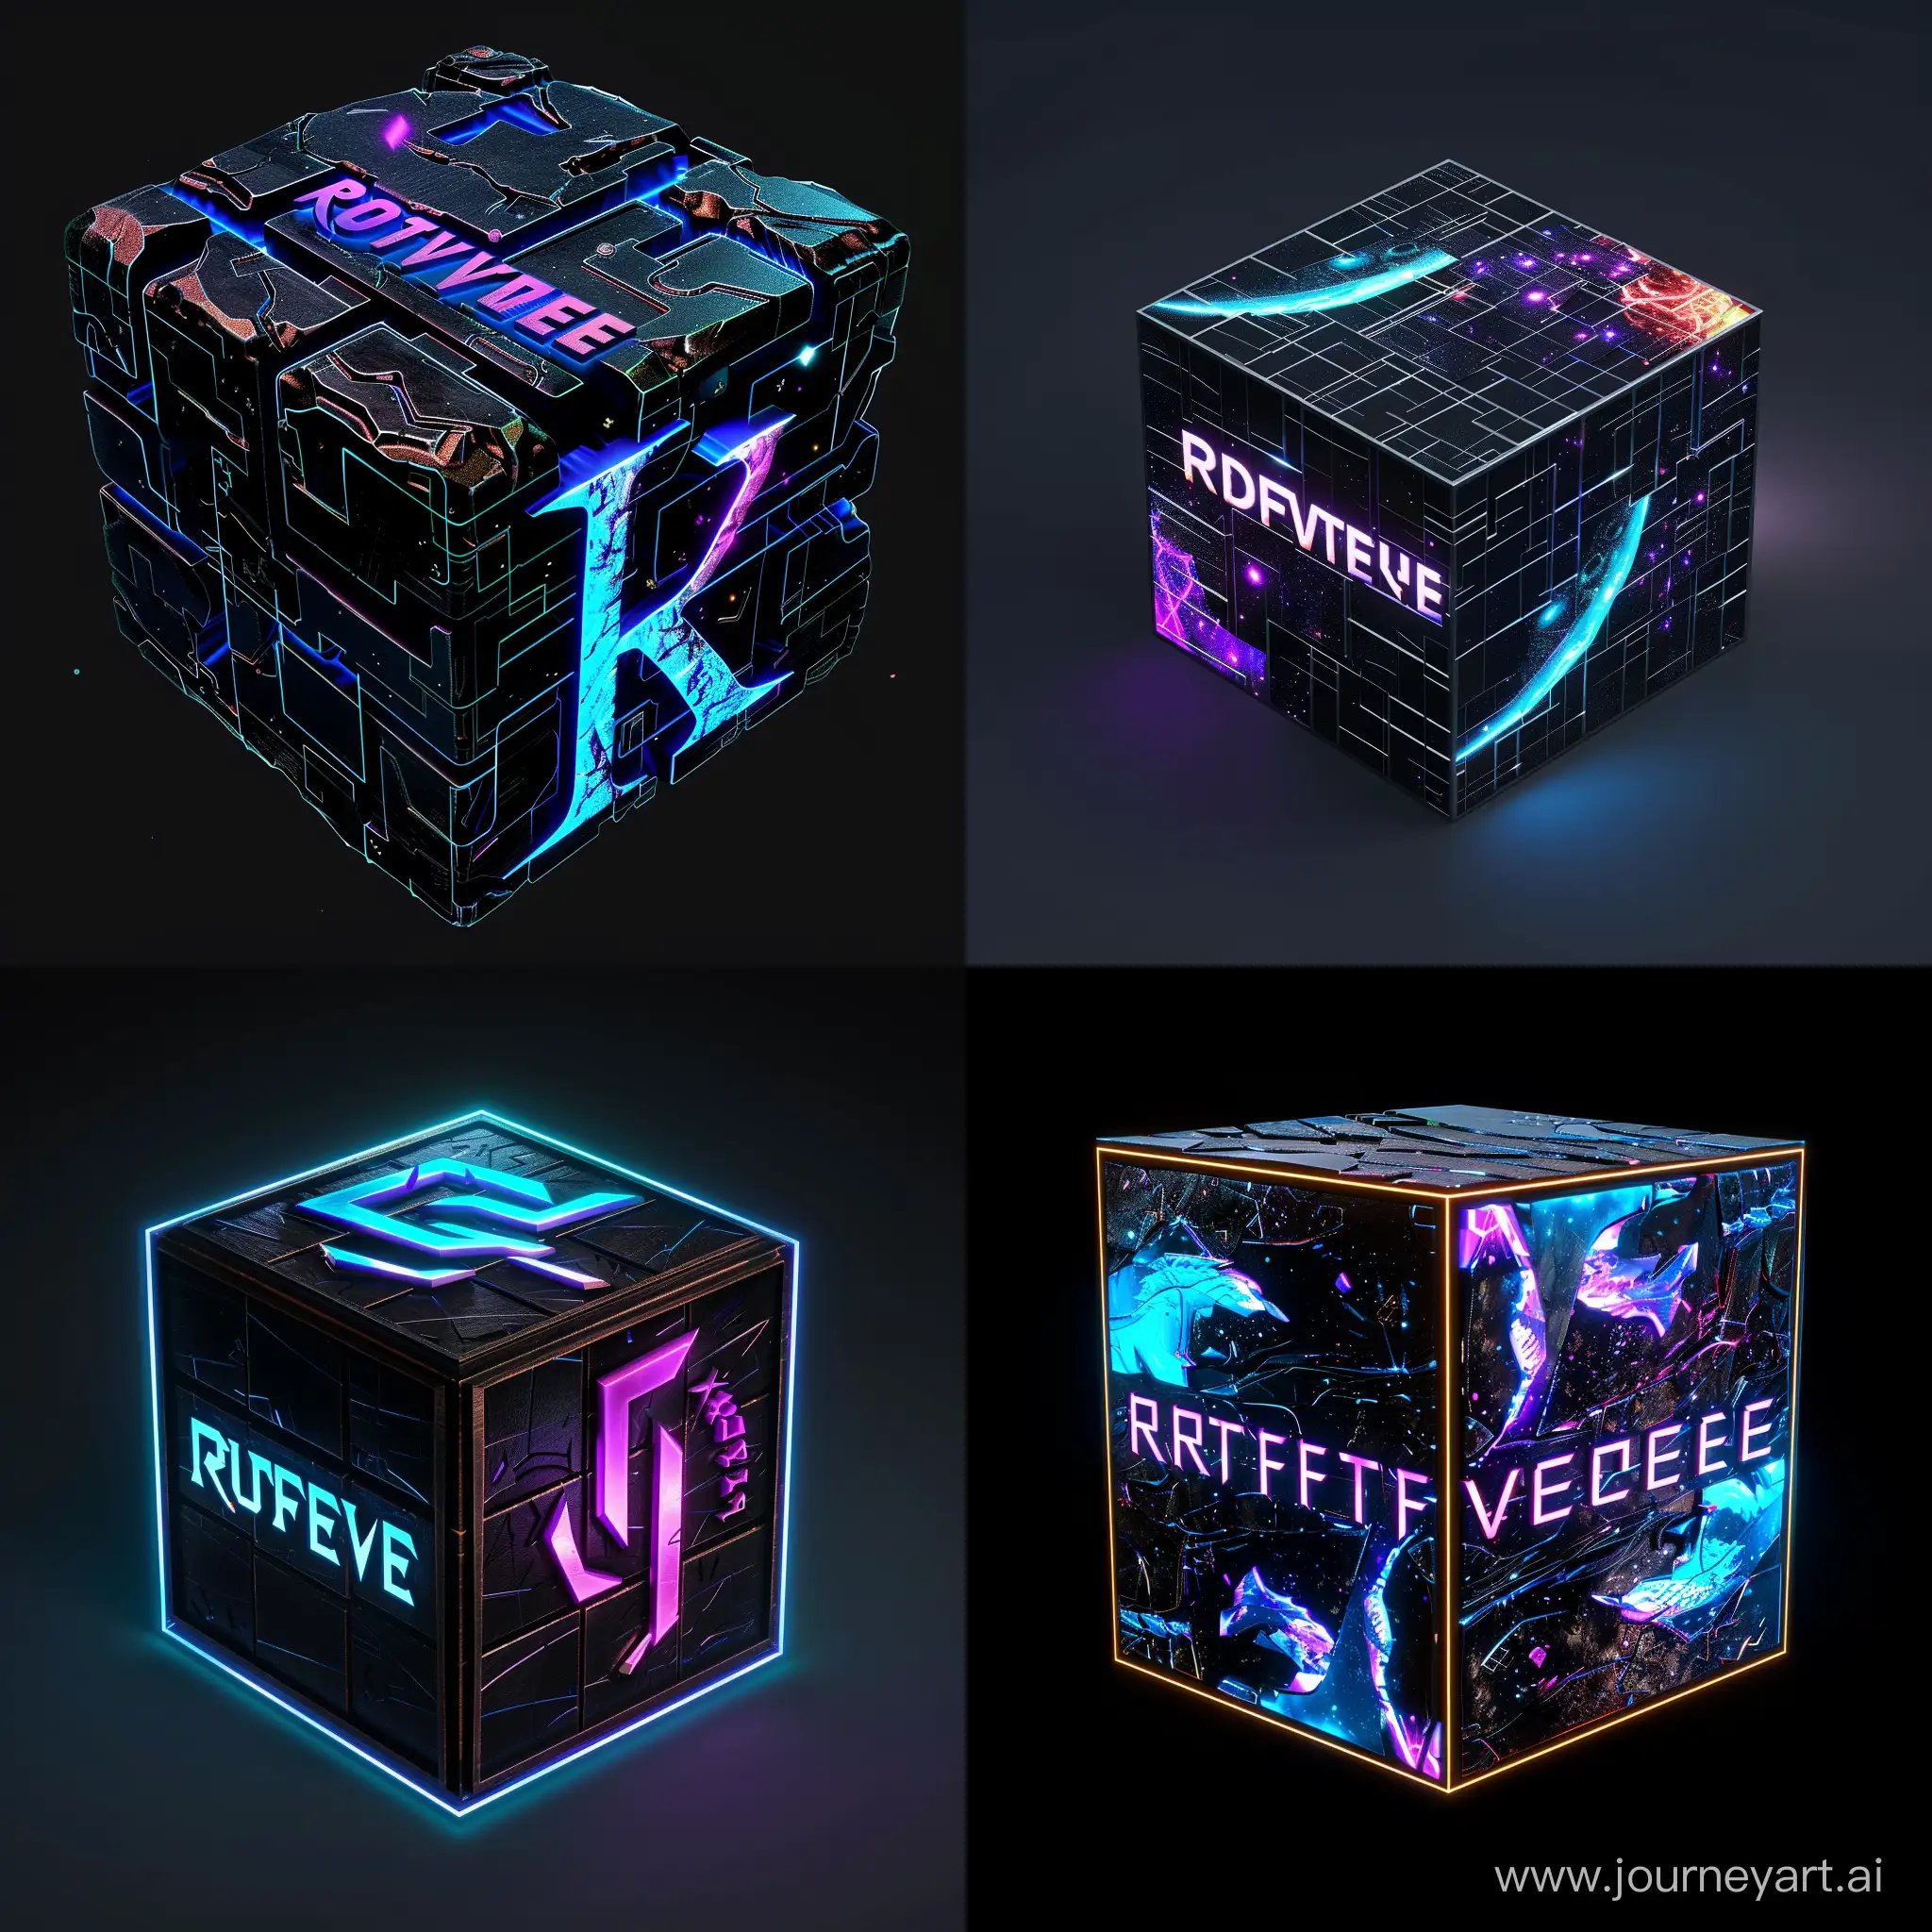 RiftVerse-Server-Cubic-Style-in-Black-Blue-and-Purple